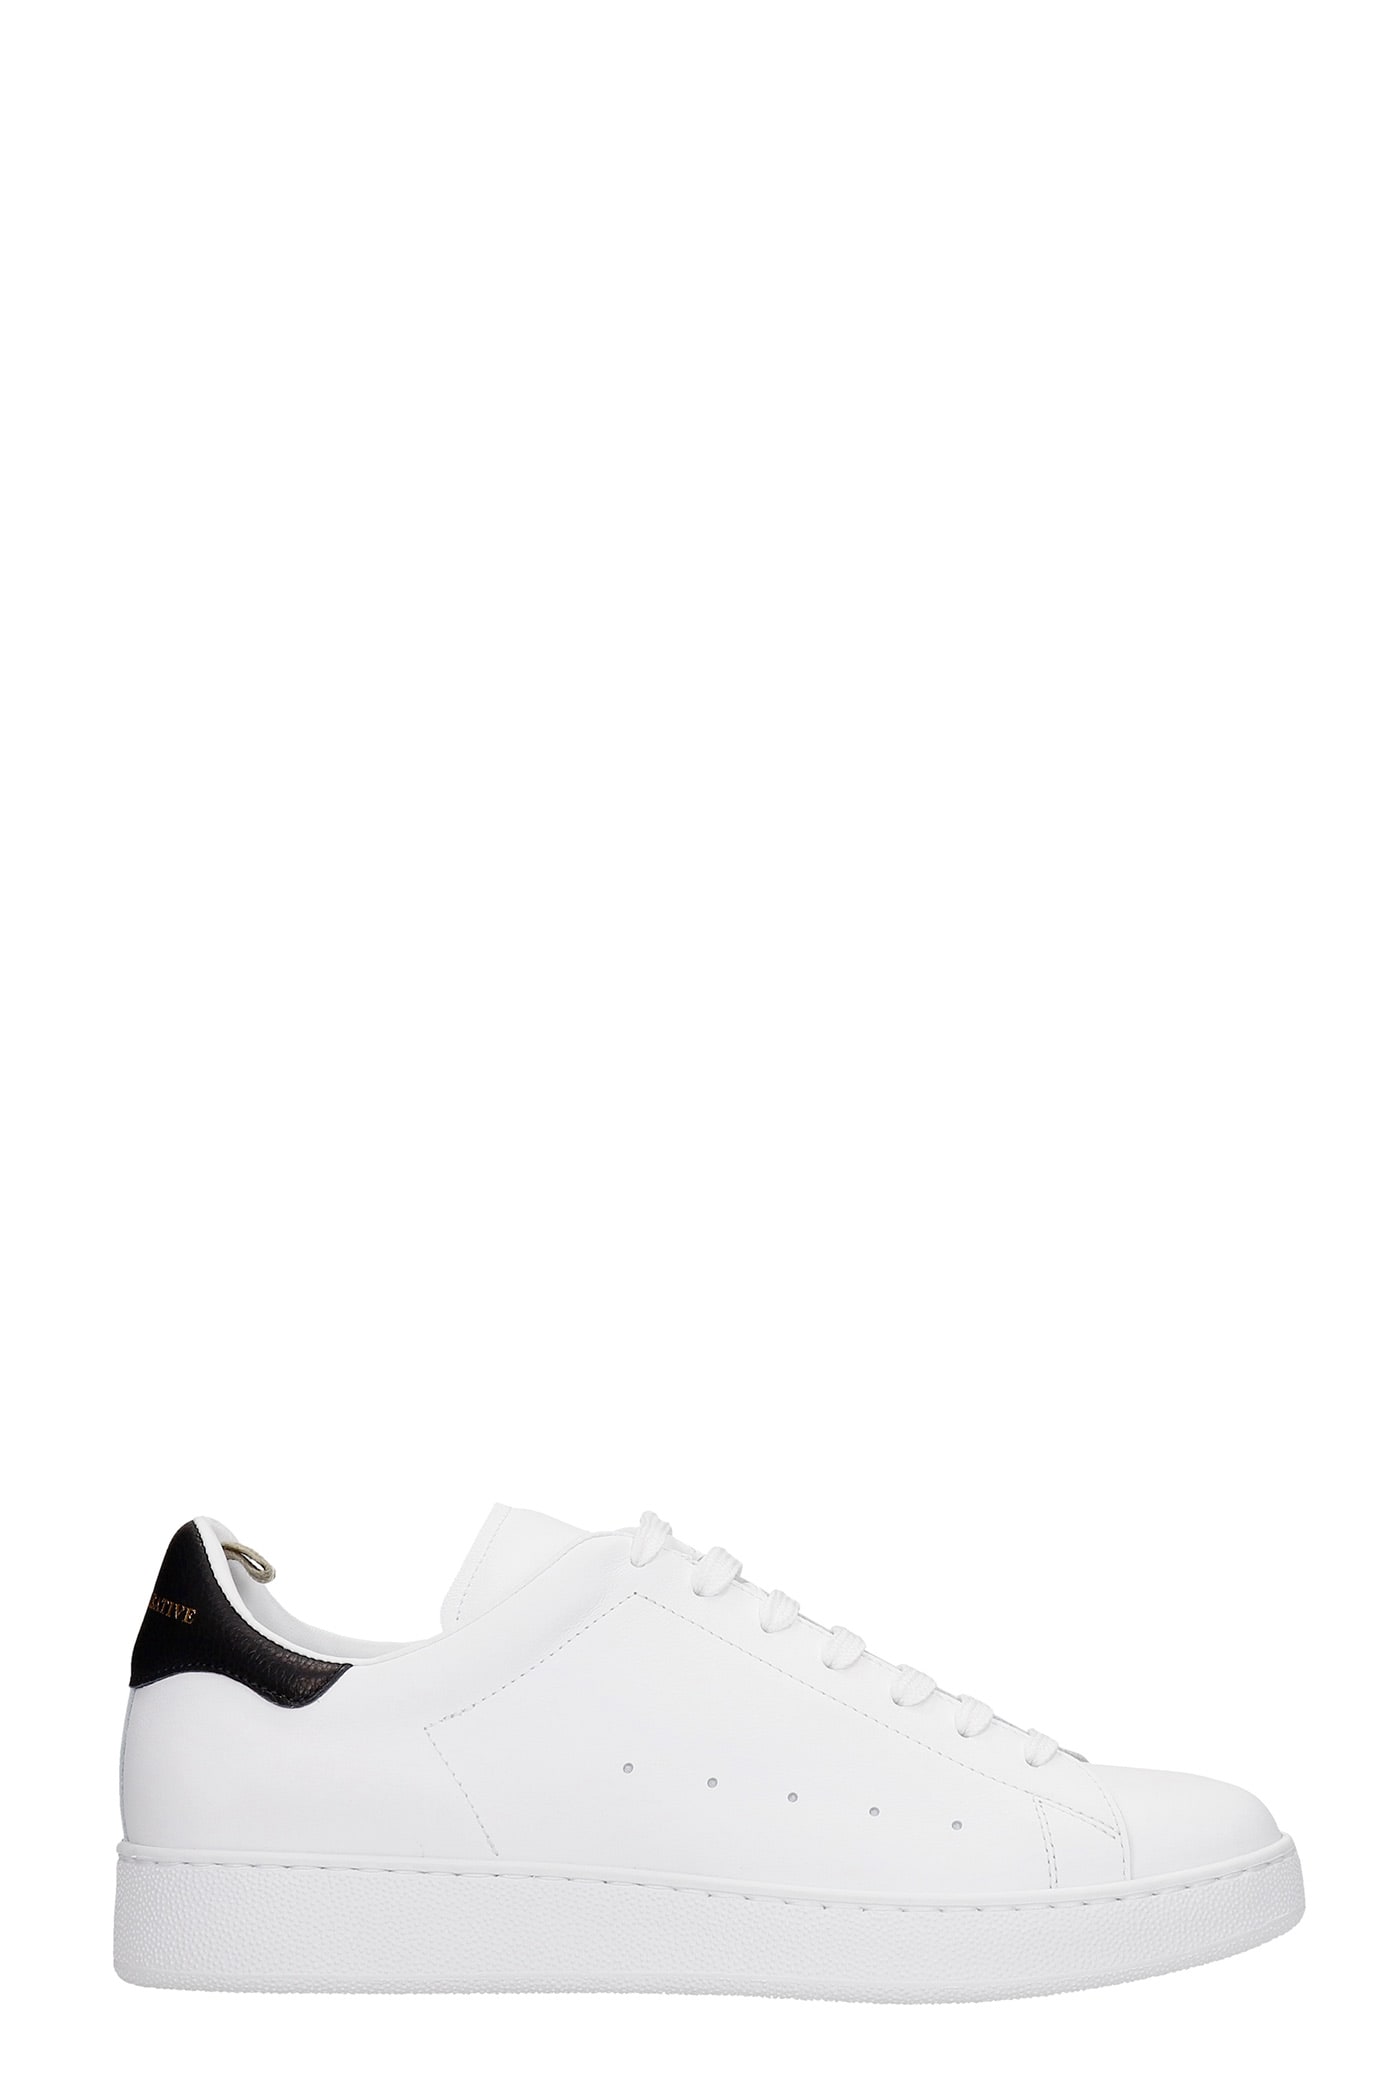 Officine Creative Mower 002 Sneakers In White Leather